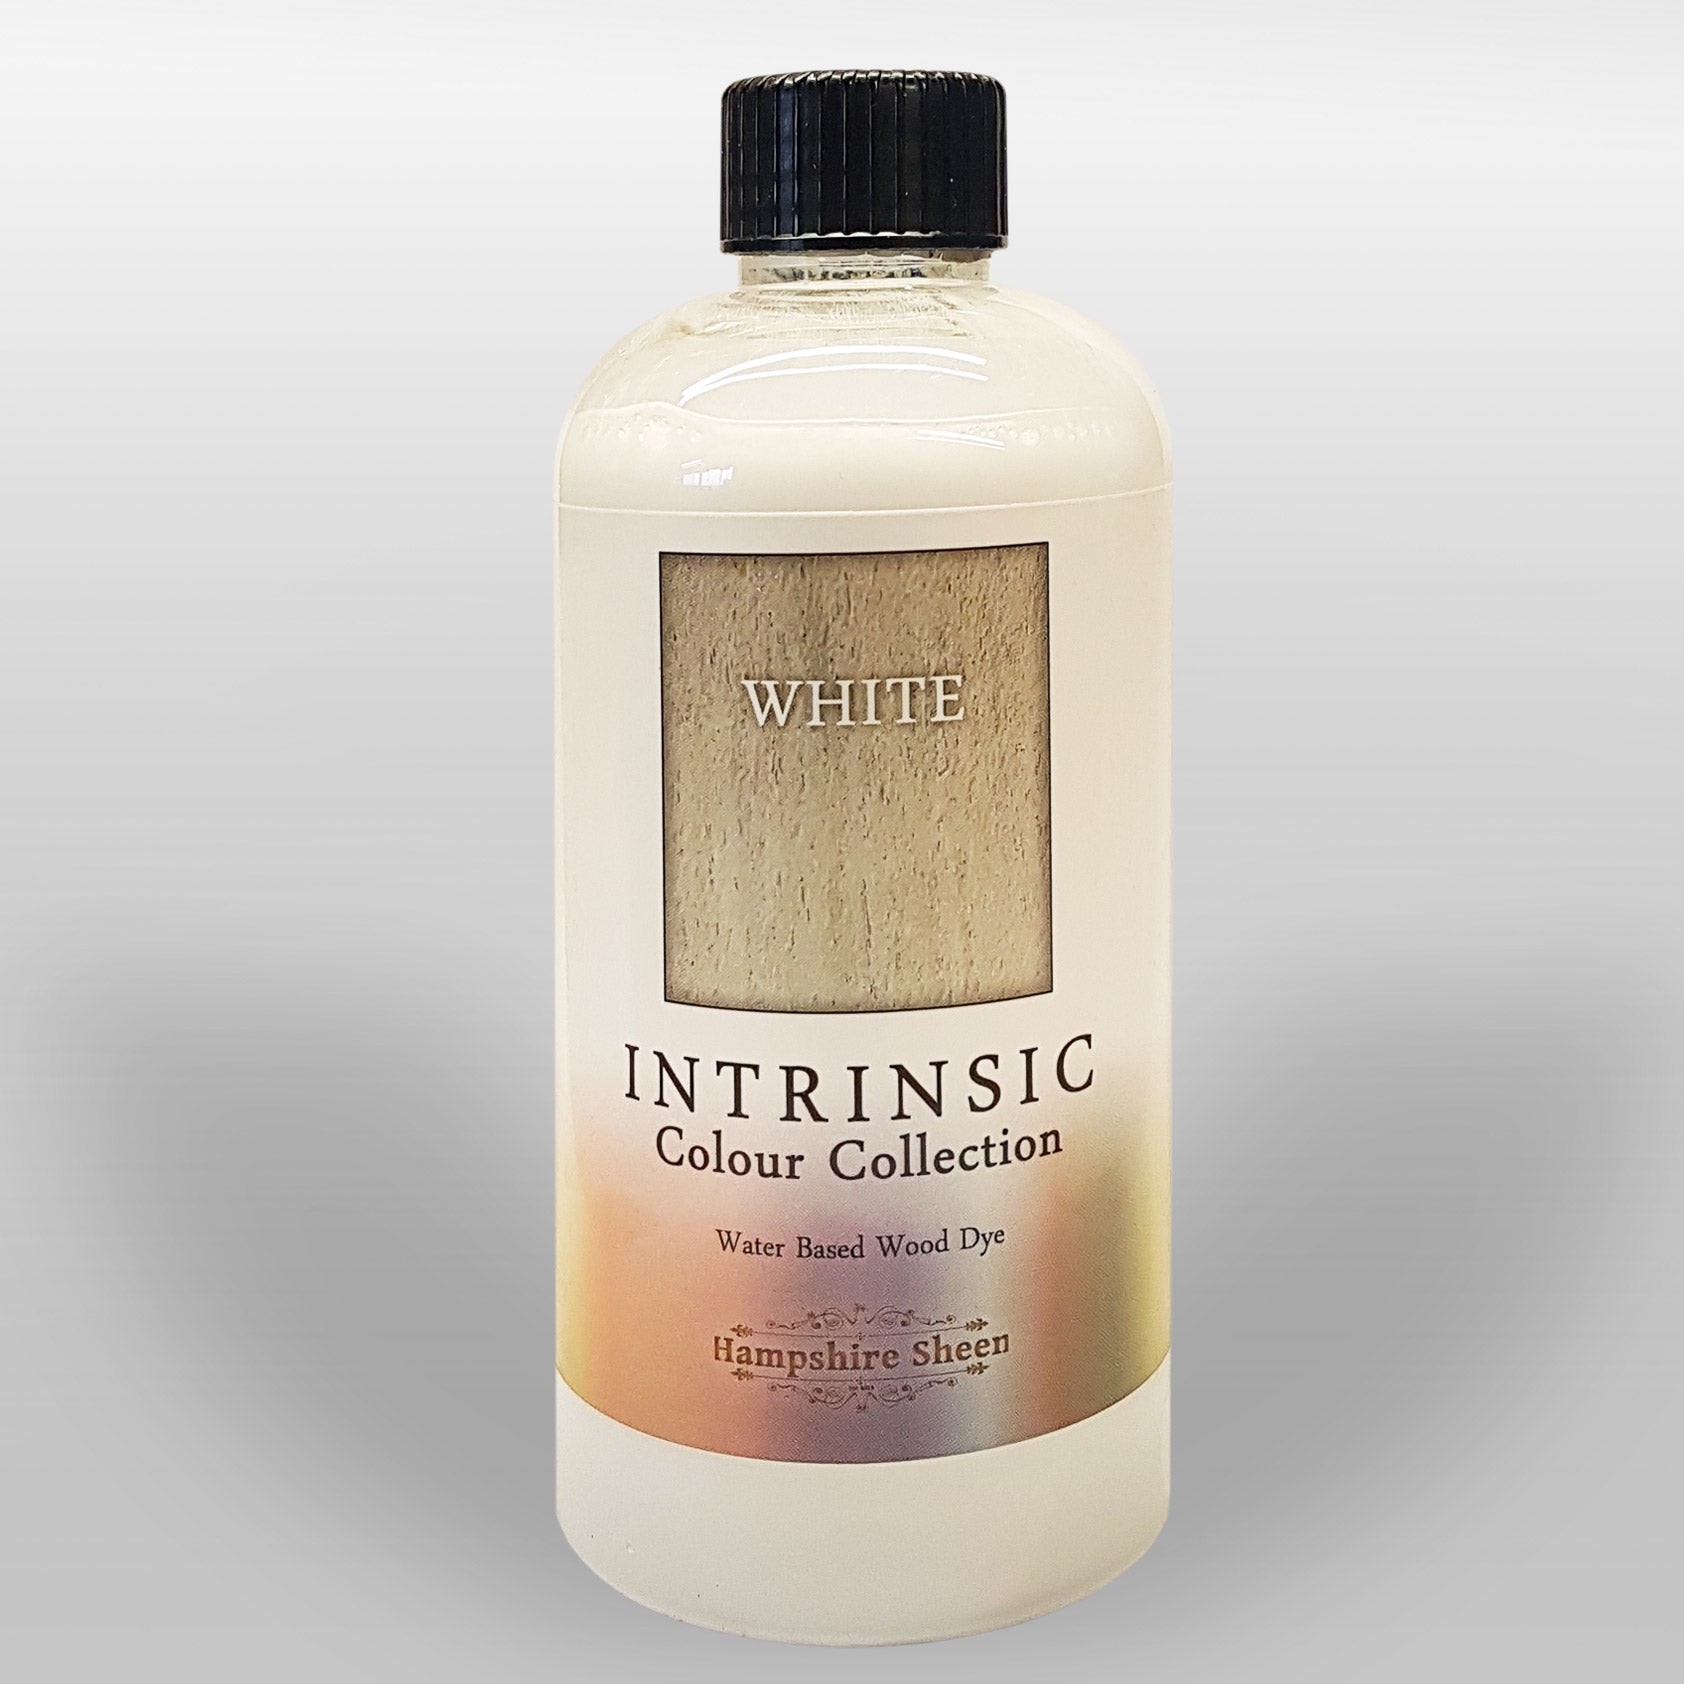 Hampshire Sheen Intrinsic Wood Dye Color Collection - Spiracraft